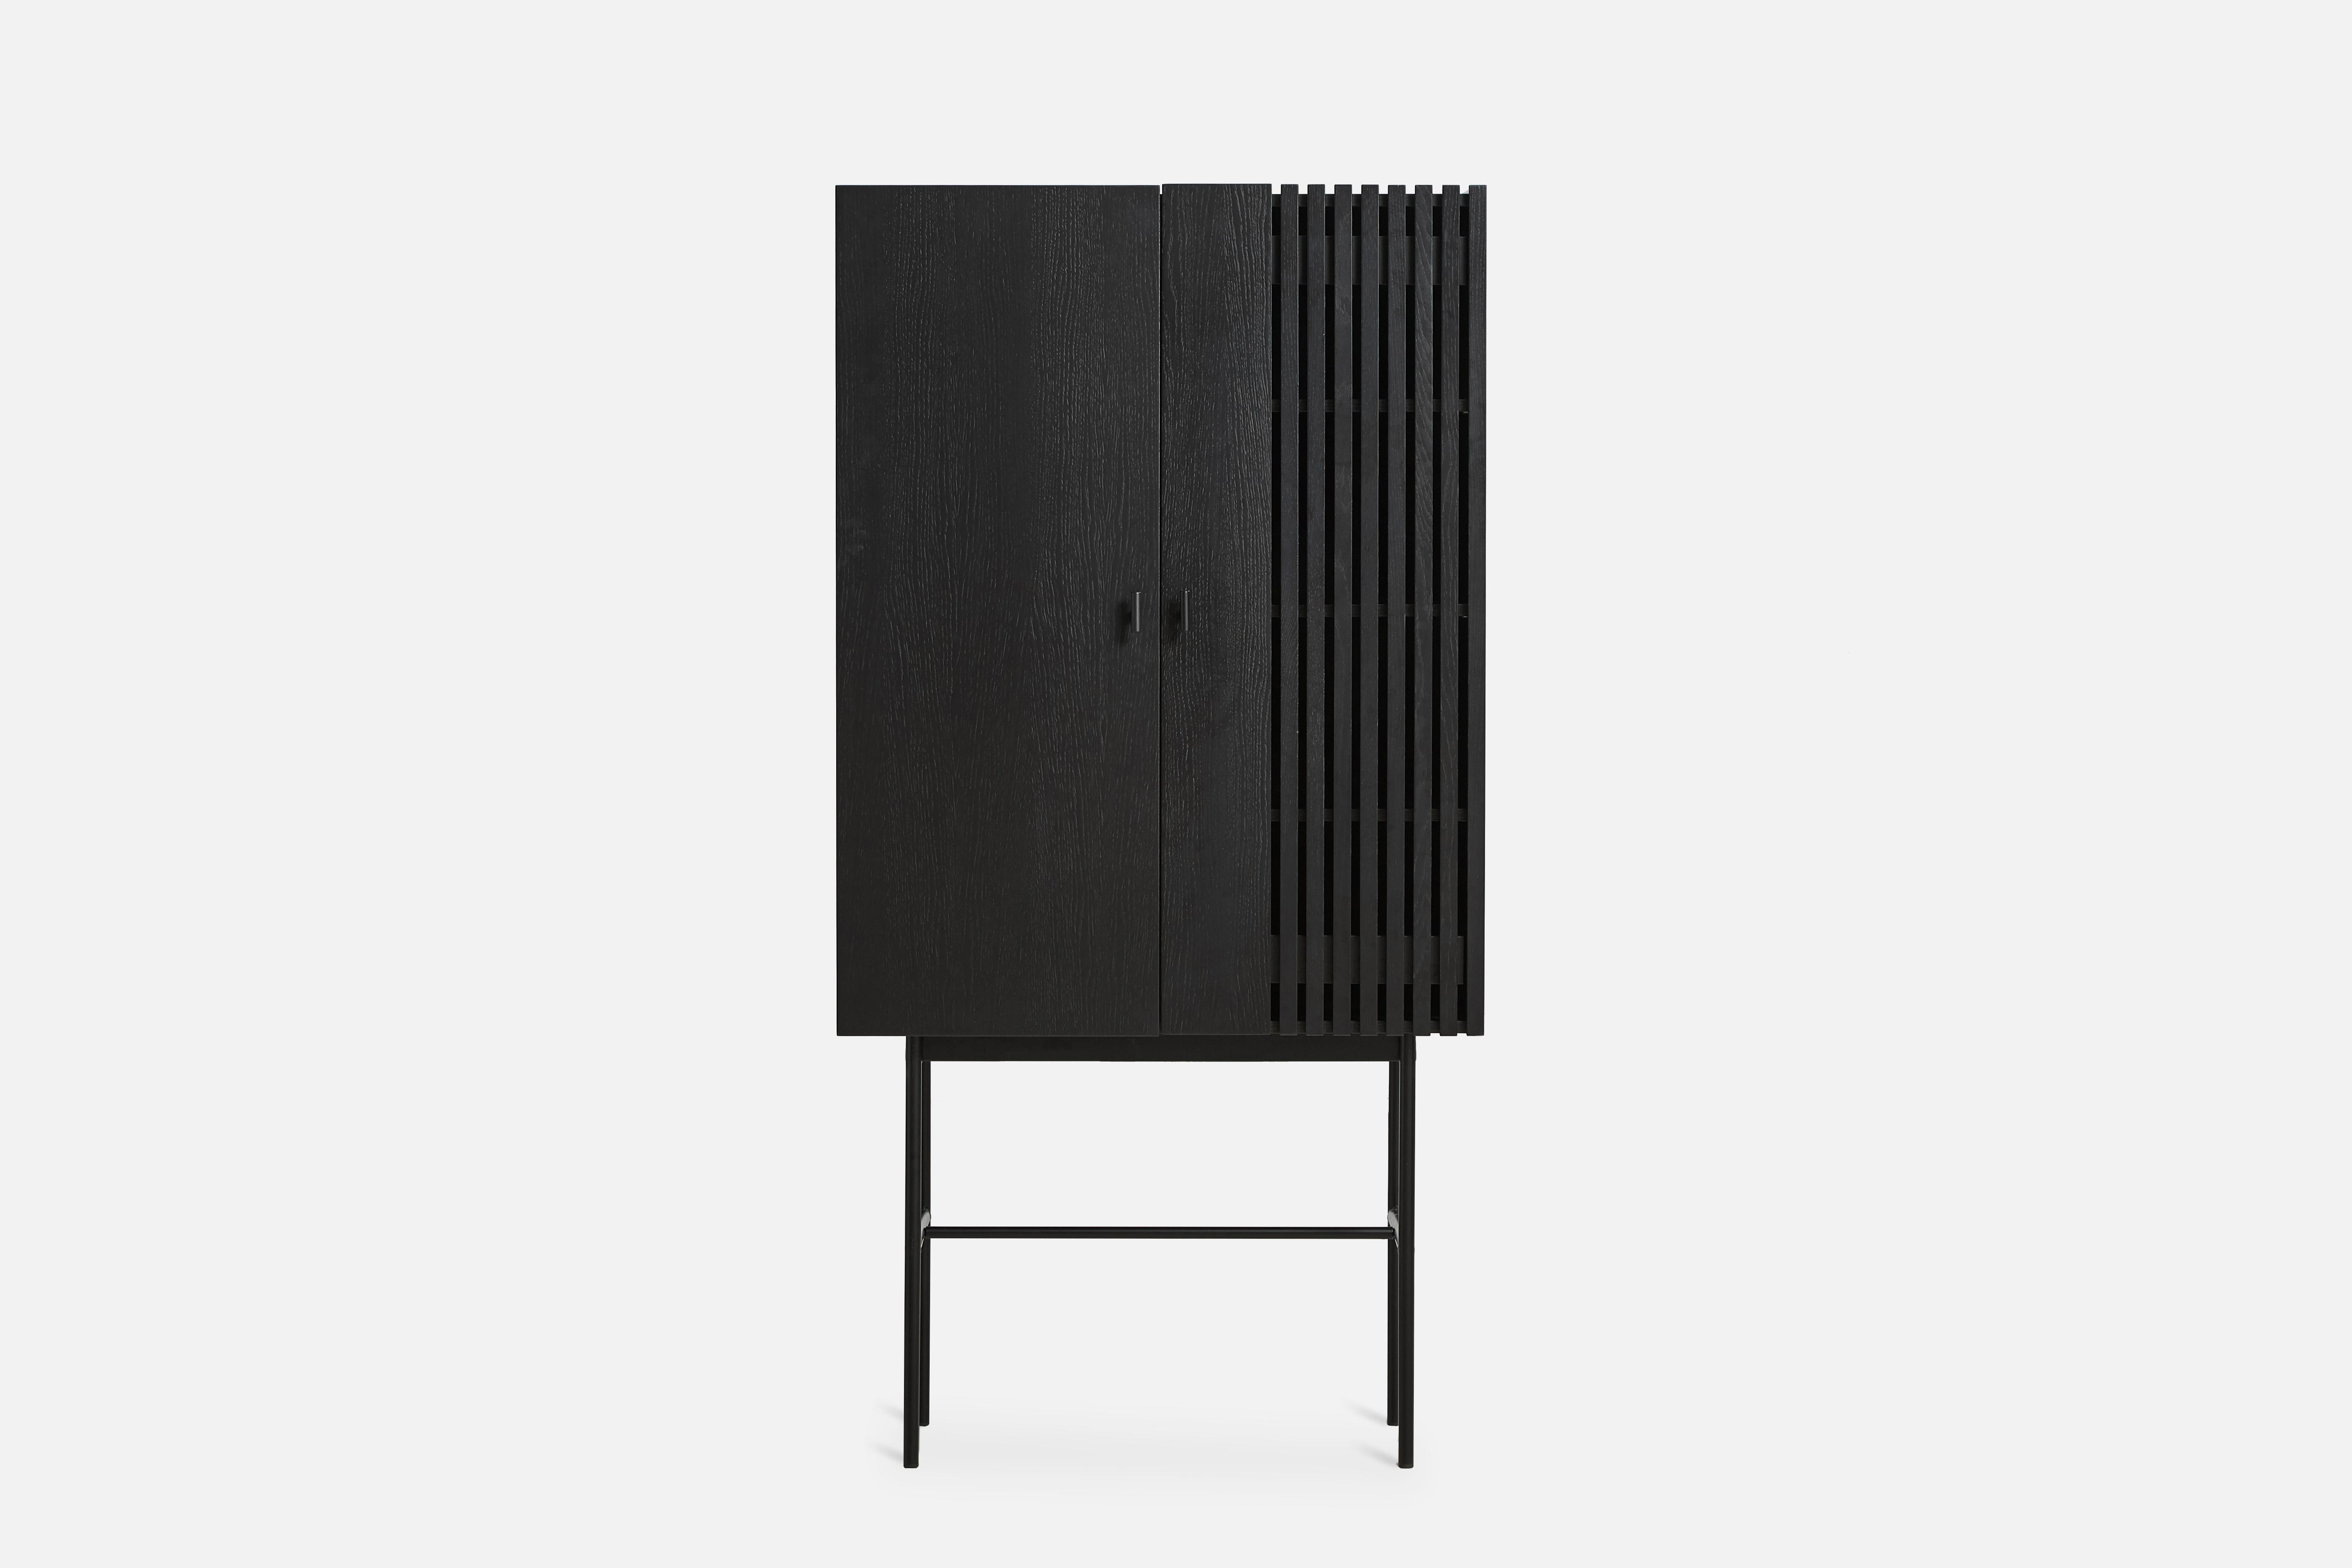 Black Oak Array highboard 80 by Says Who
Materials: Oak, Metal
Dimensions: D 44 x W 80 x H 160 cm
Also available in different colors and materials.

The founders, Mia and Torben Koed, decided to put their 30 years of experience into a new